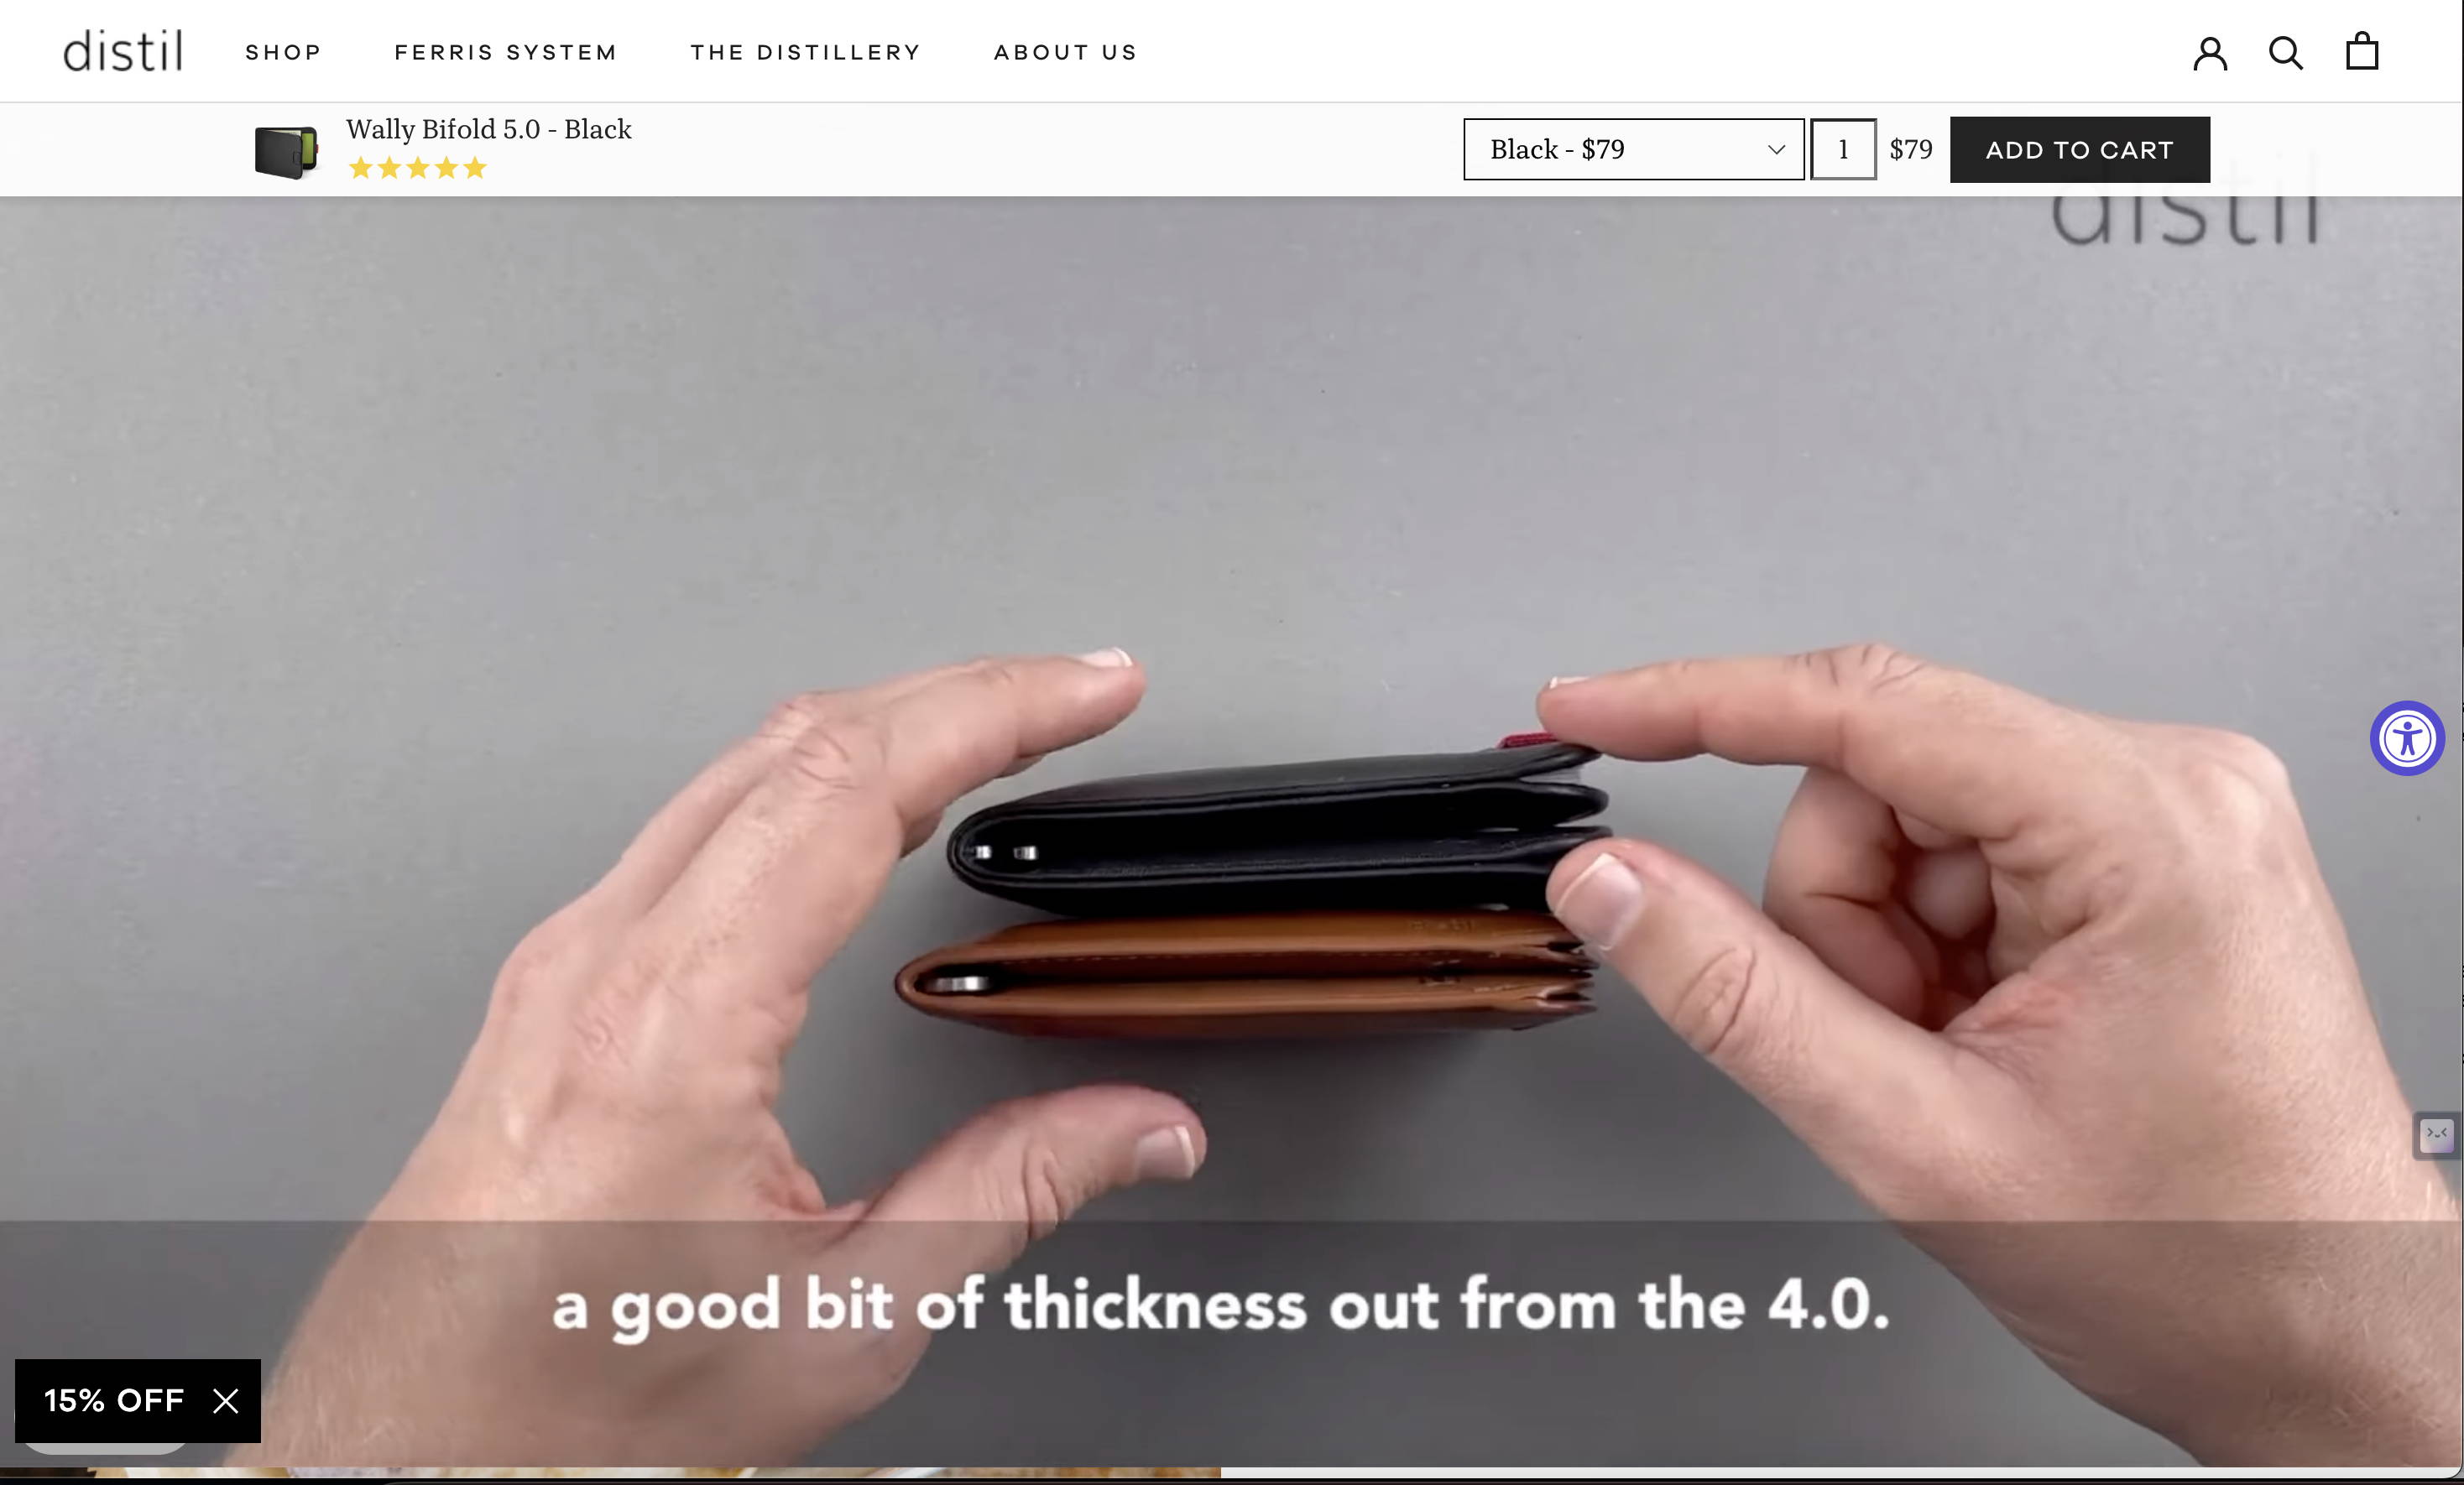 Example of videoing product usability for eCommerce brands